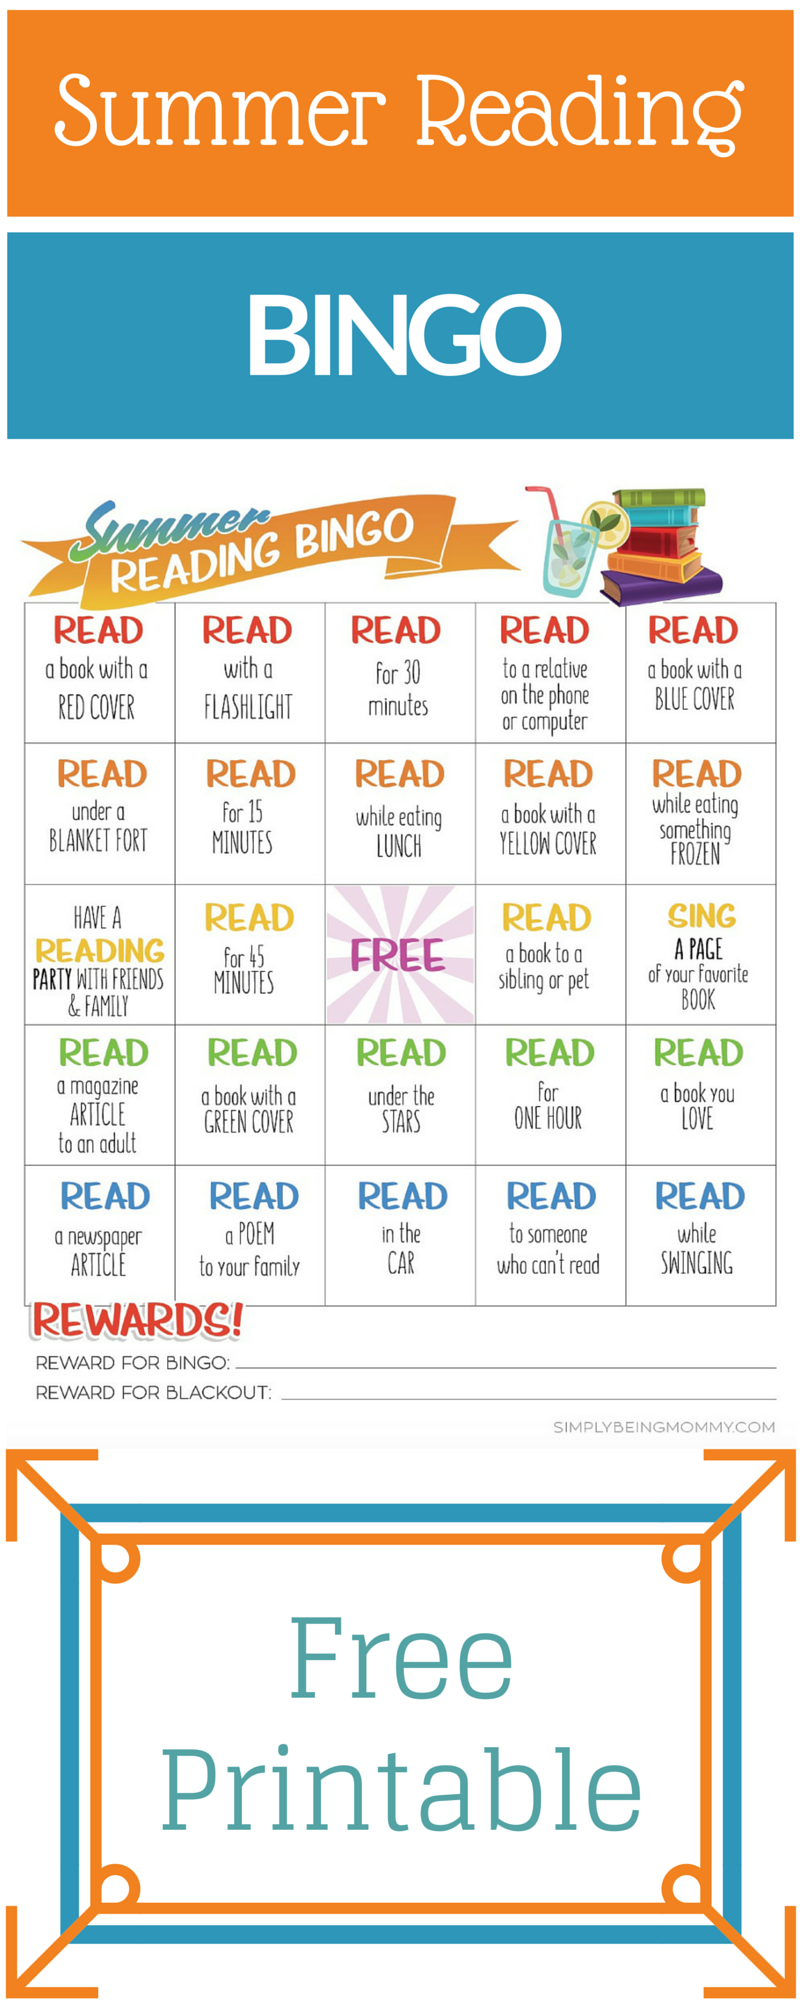 Get your kids excited about reading during the summer with this Summer Reading Bingo printable. It's the perfect way to reward reading while also making it exciting.